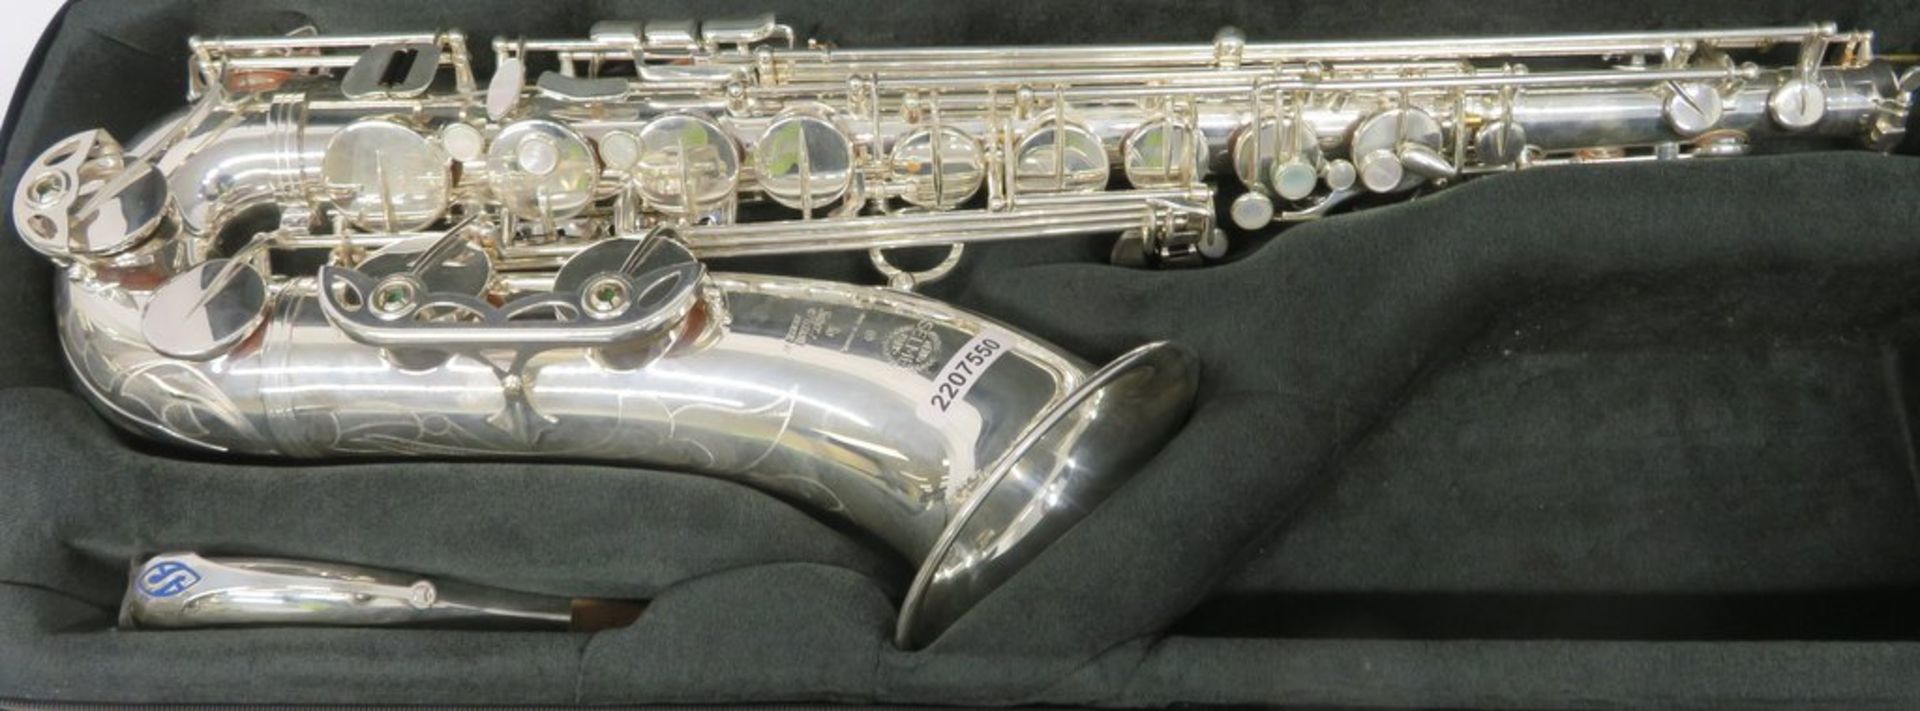 Henri Selmer Super Action 80 Serie 2 Tenor Saxophone With Case. Serial Number: N.607728. - Image 2 of 20